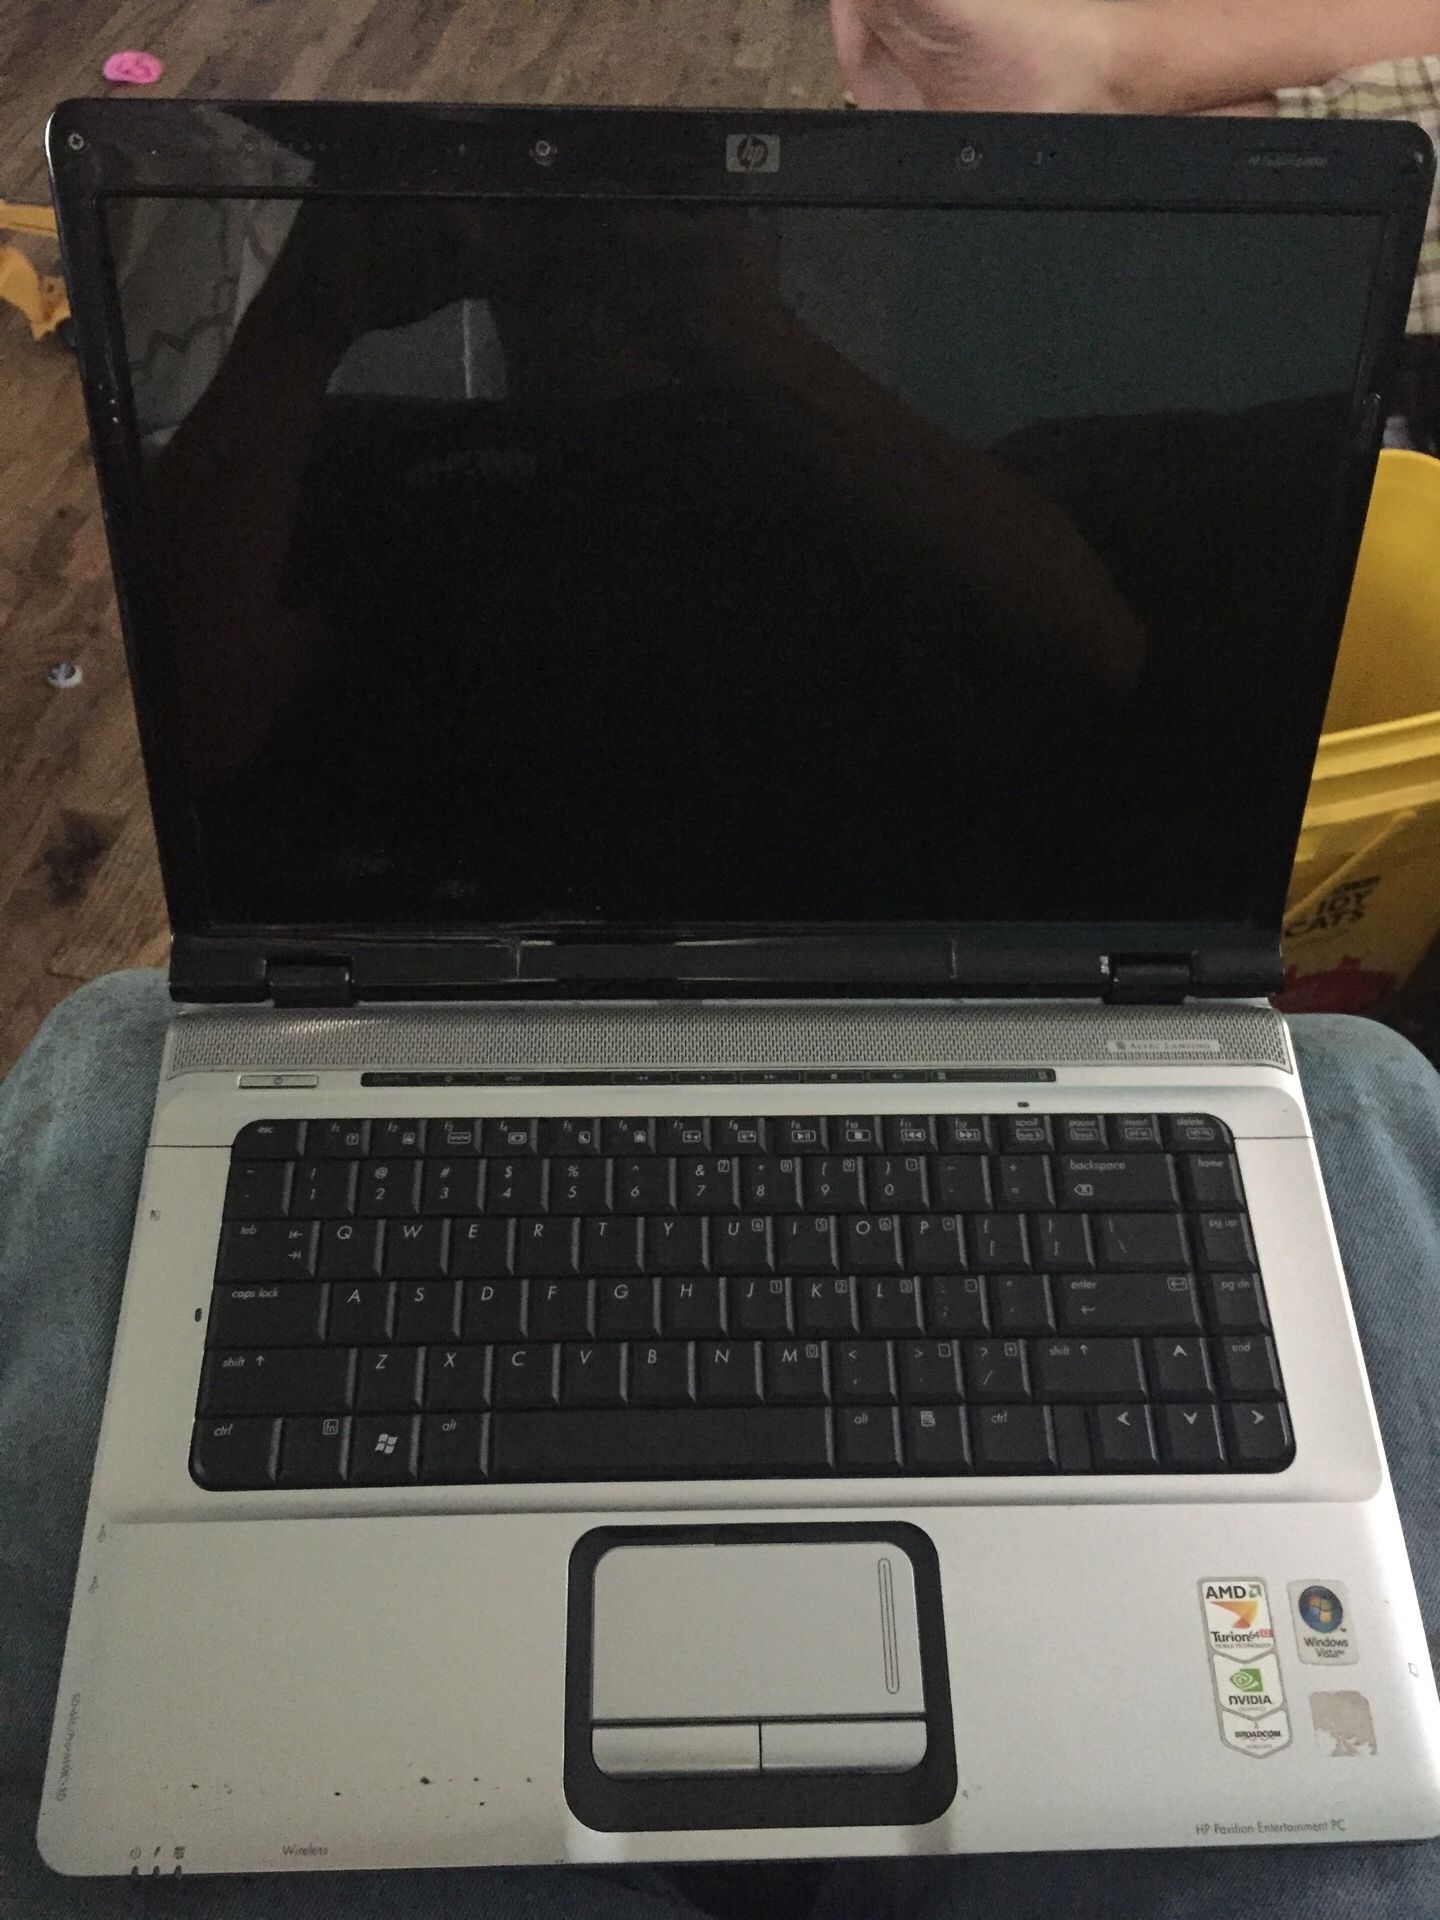 Hp laptop computer . HP dv6000 will not turn on